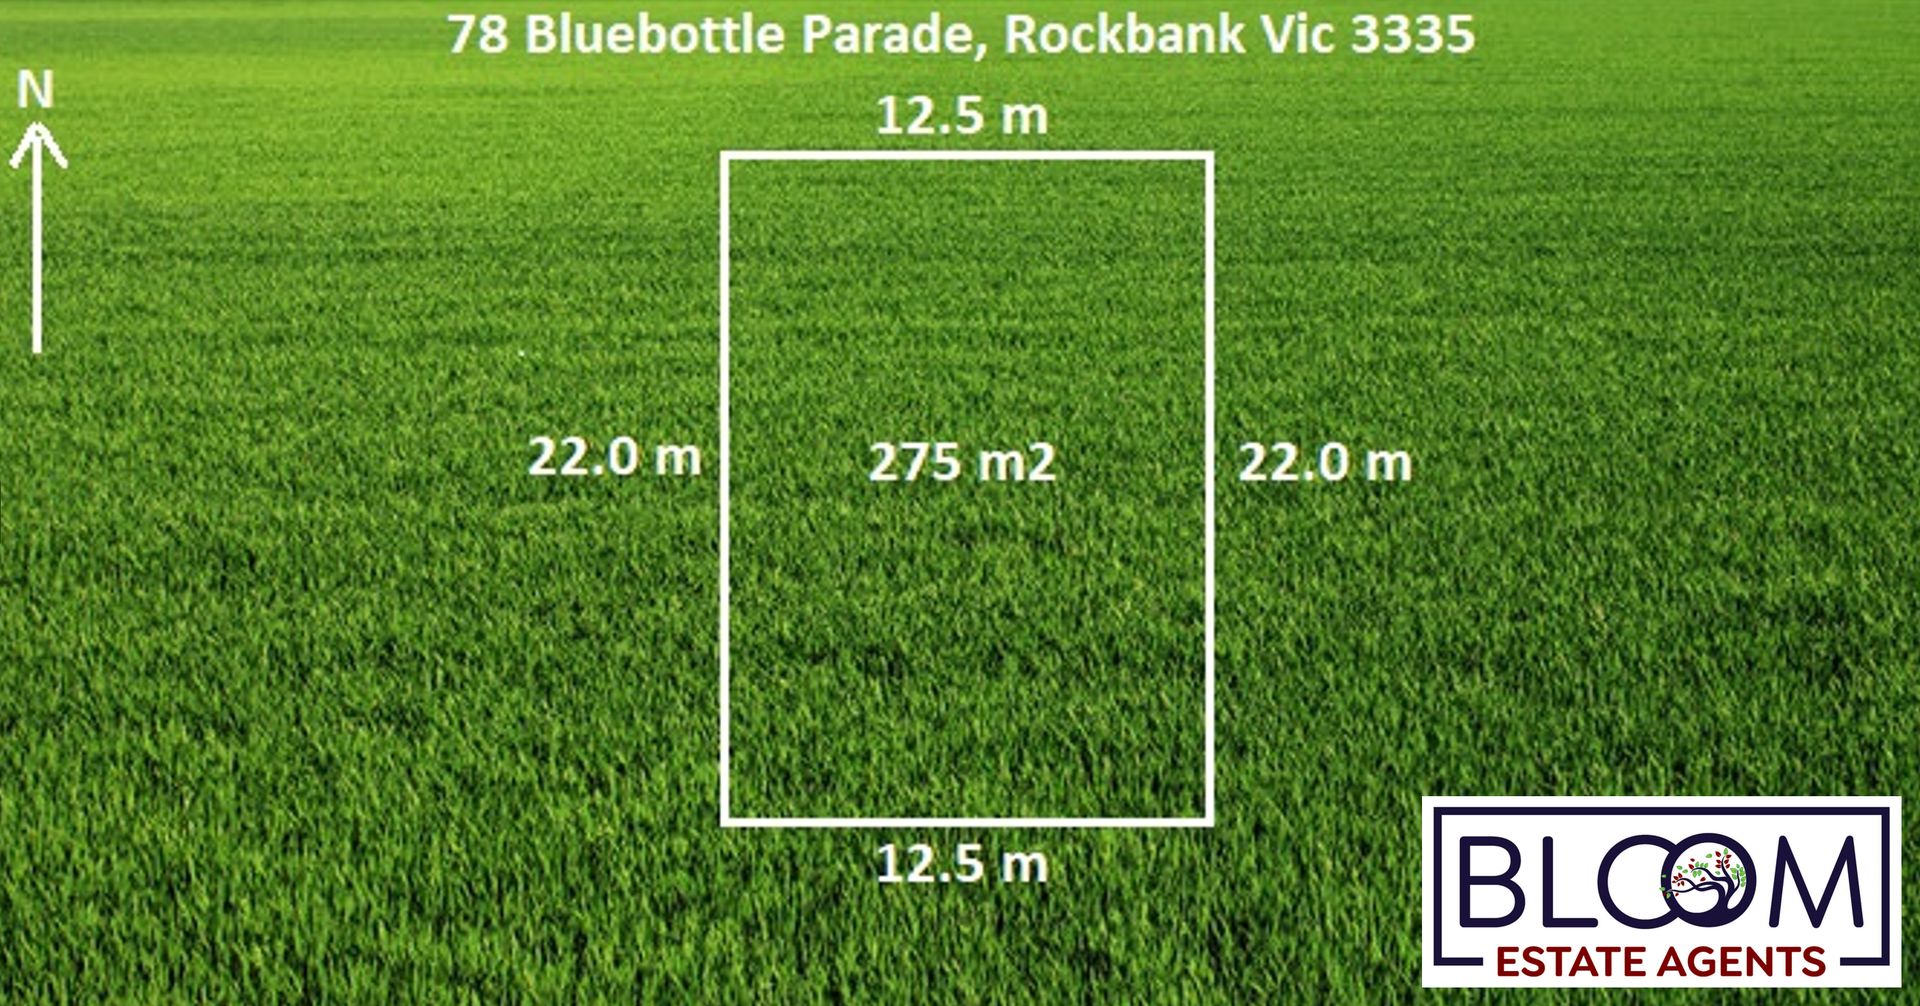 Vacant land in 78 Bluebottle Parade, ROCKBANK VIC, 3335